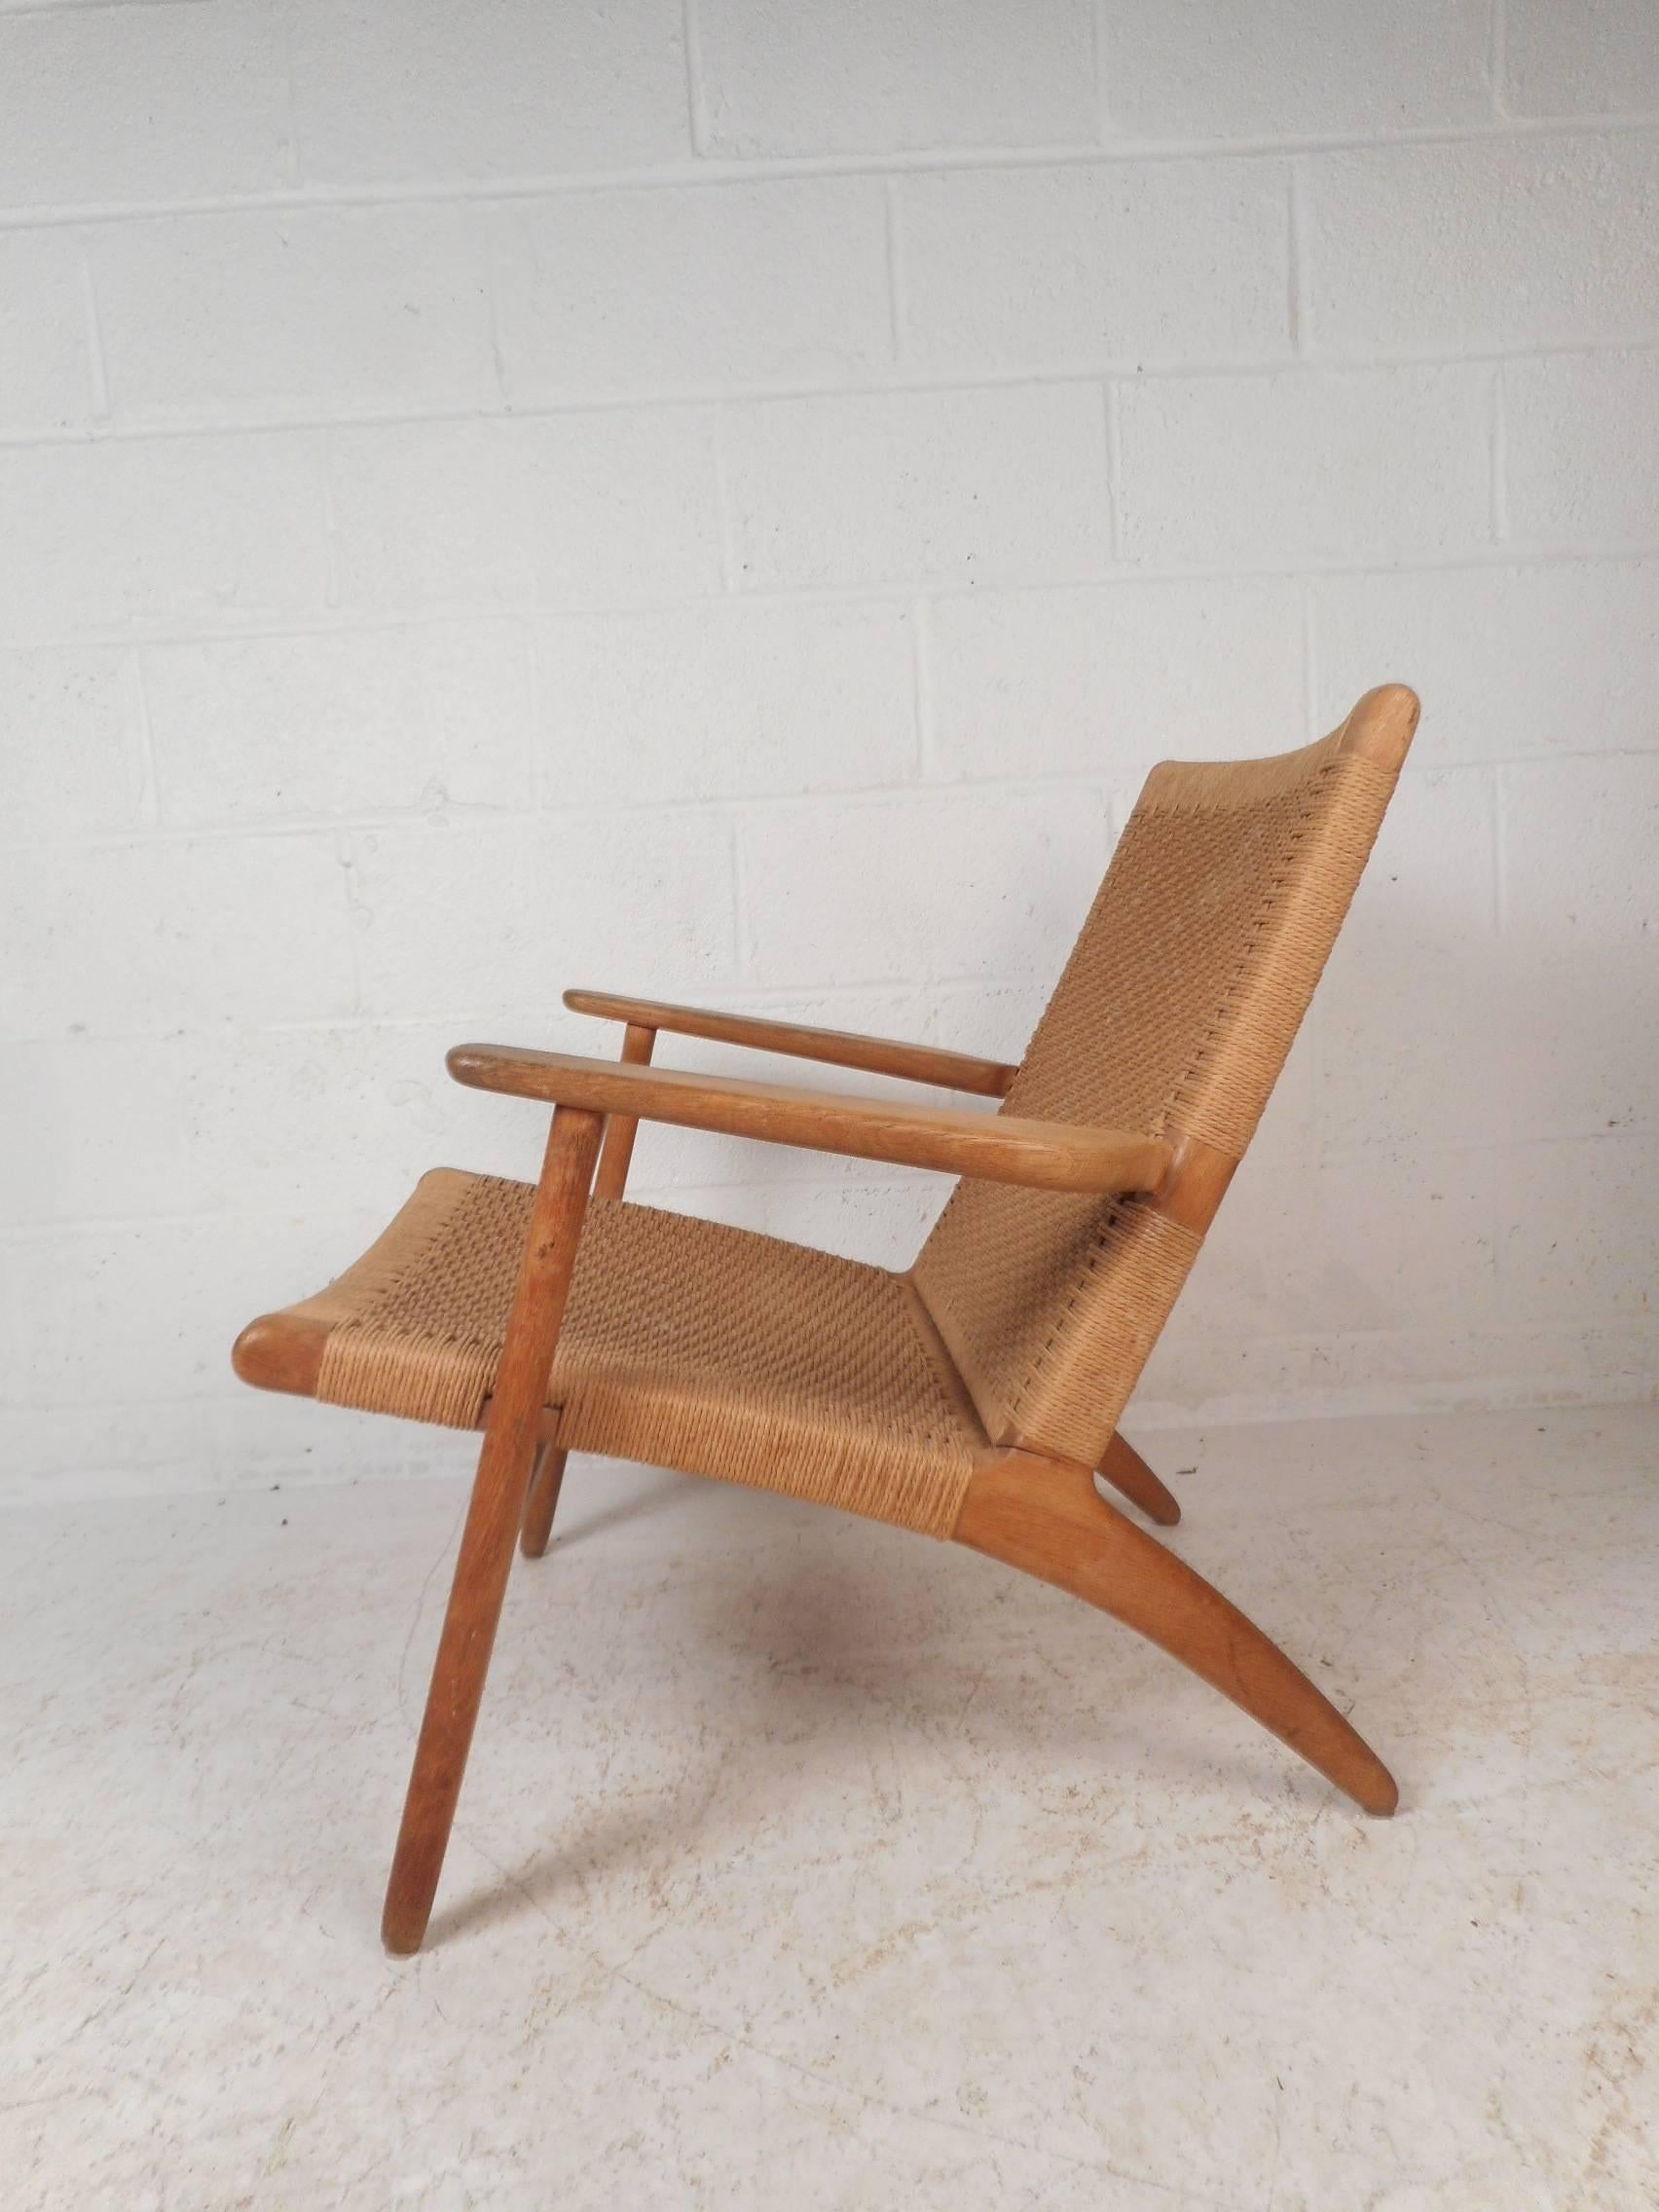 This beautiful Danish modern lounge chair features a solid oak frame with angled back legs and sculpted arm rests. Sleek design with a soft rush seat and back rest adding to the midcentury appeal. Sturdy construction with beautiful light colored